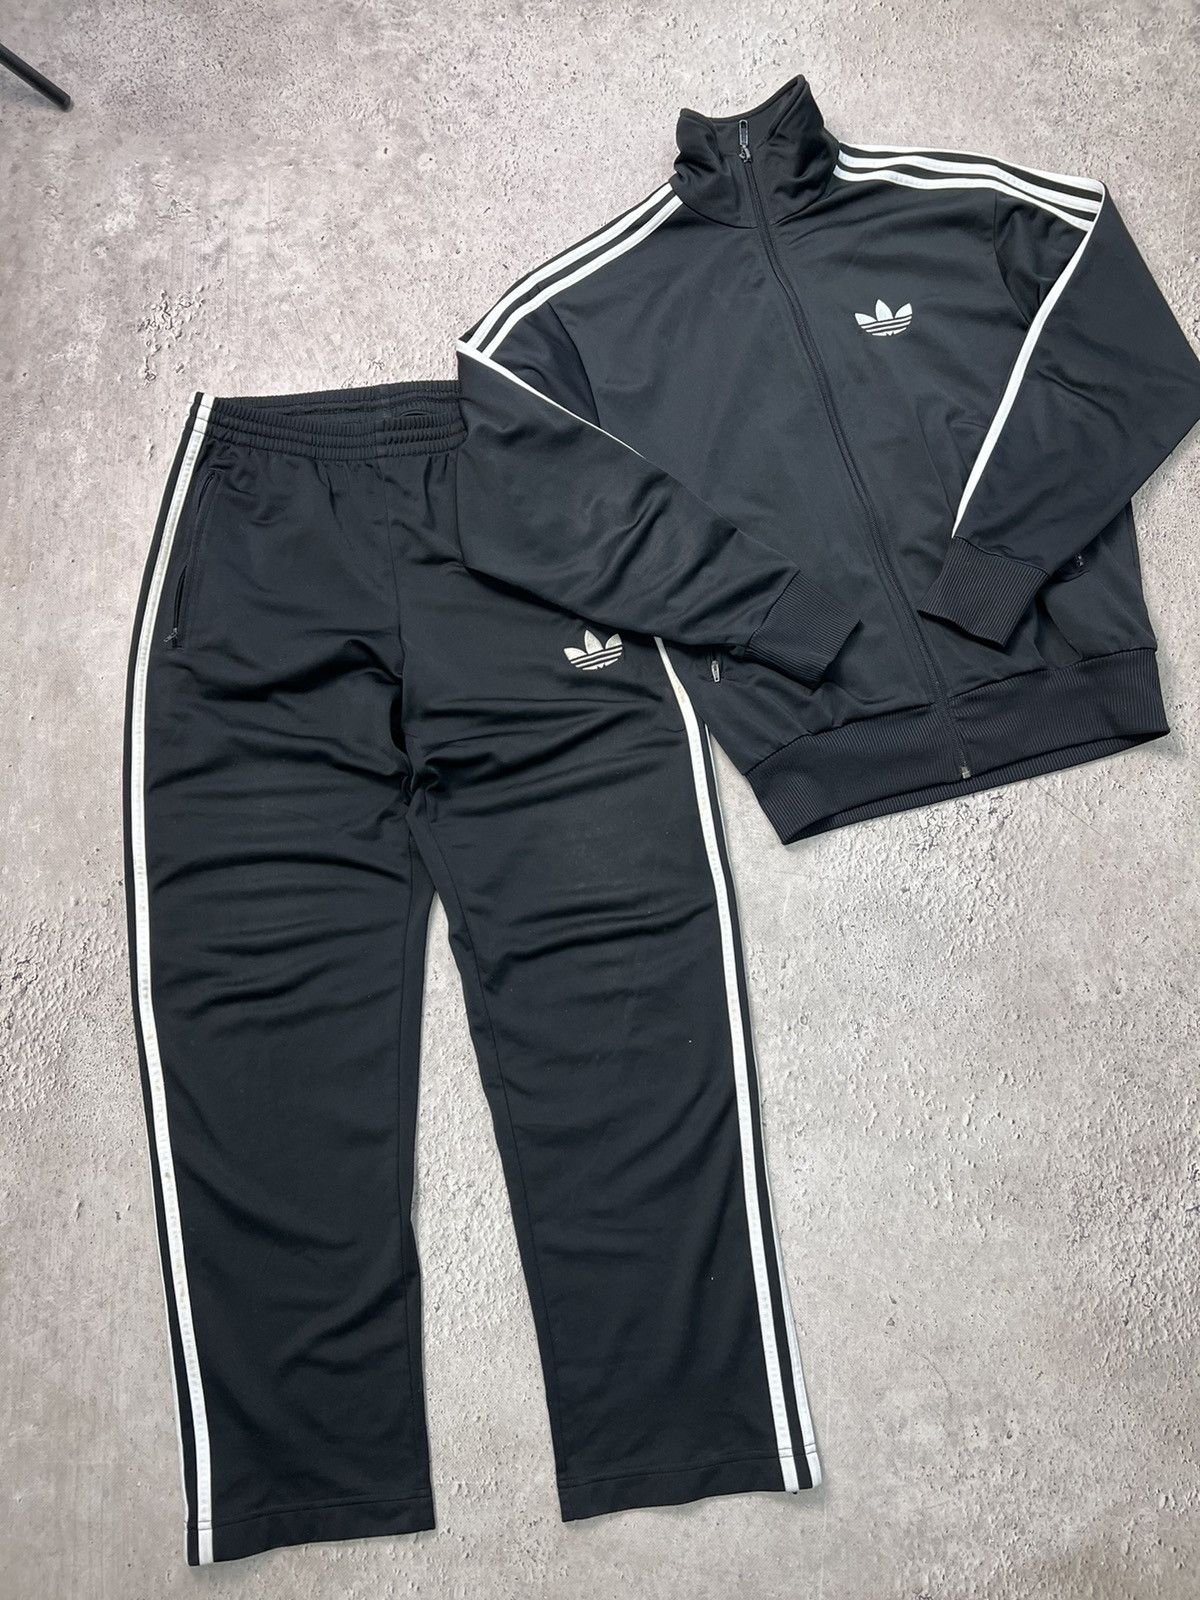 20AWbalenciaga track suit 20aw セットアップ